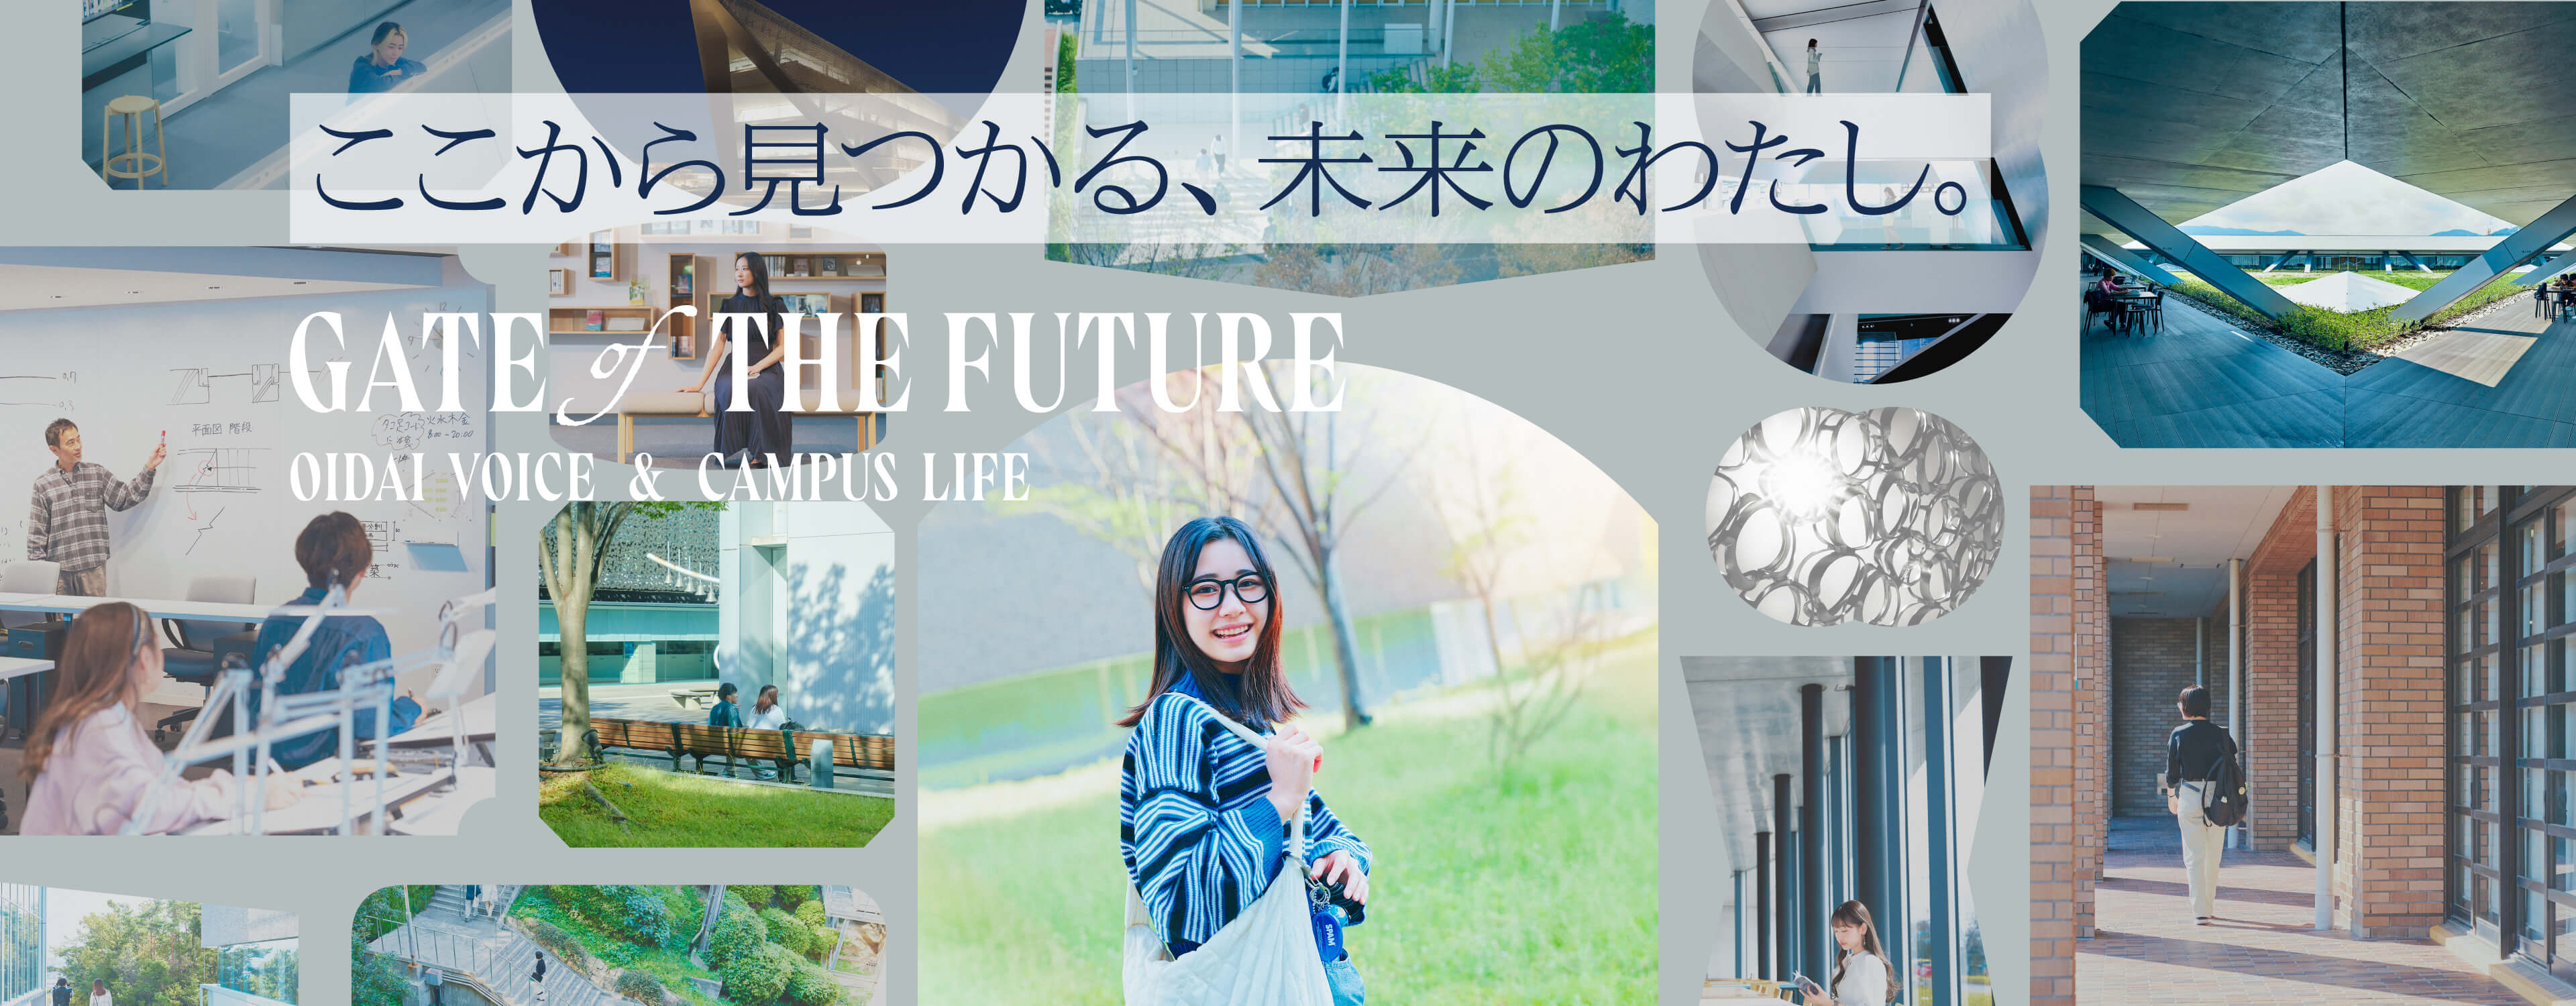 GATE of THE FUTURE - OIDAI VOICE and CAMPUS LIFE